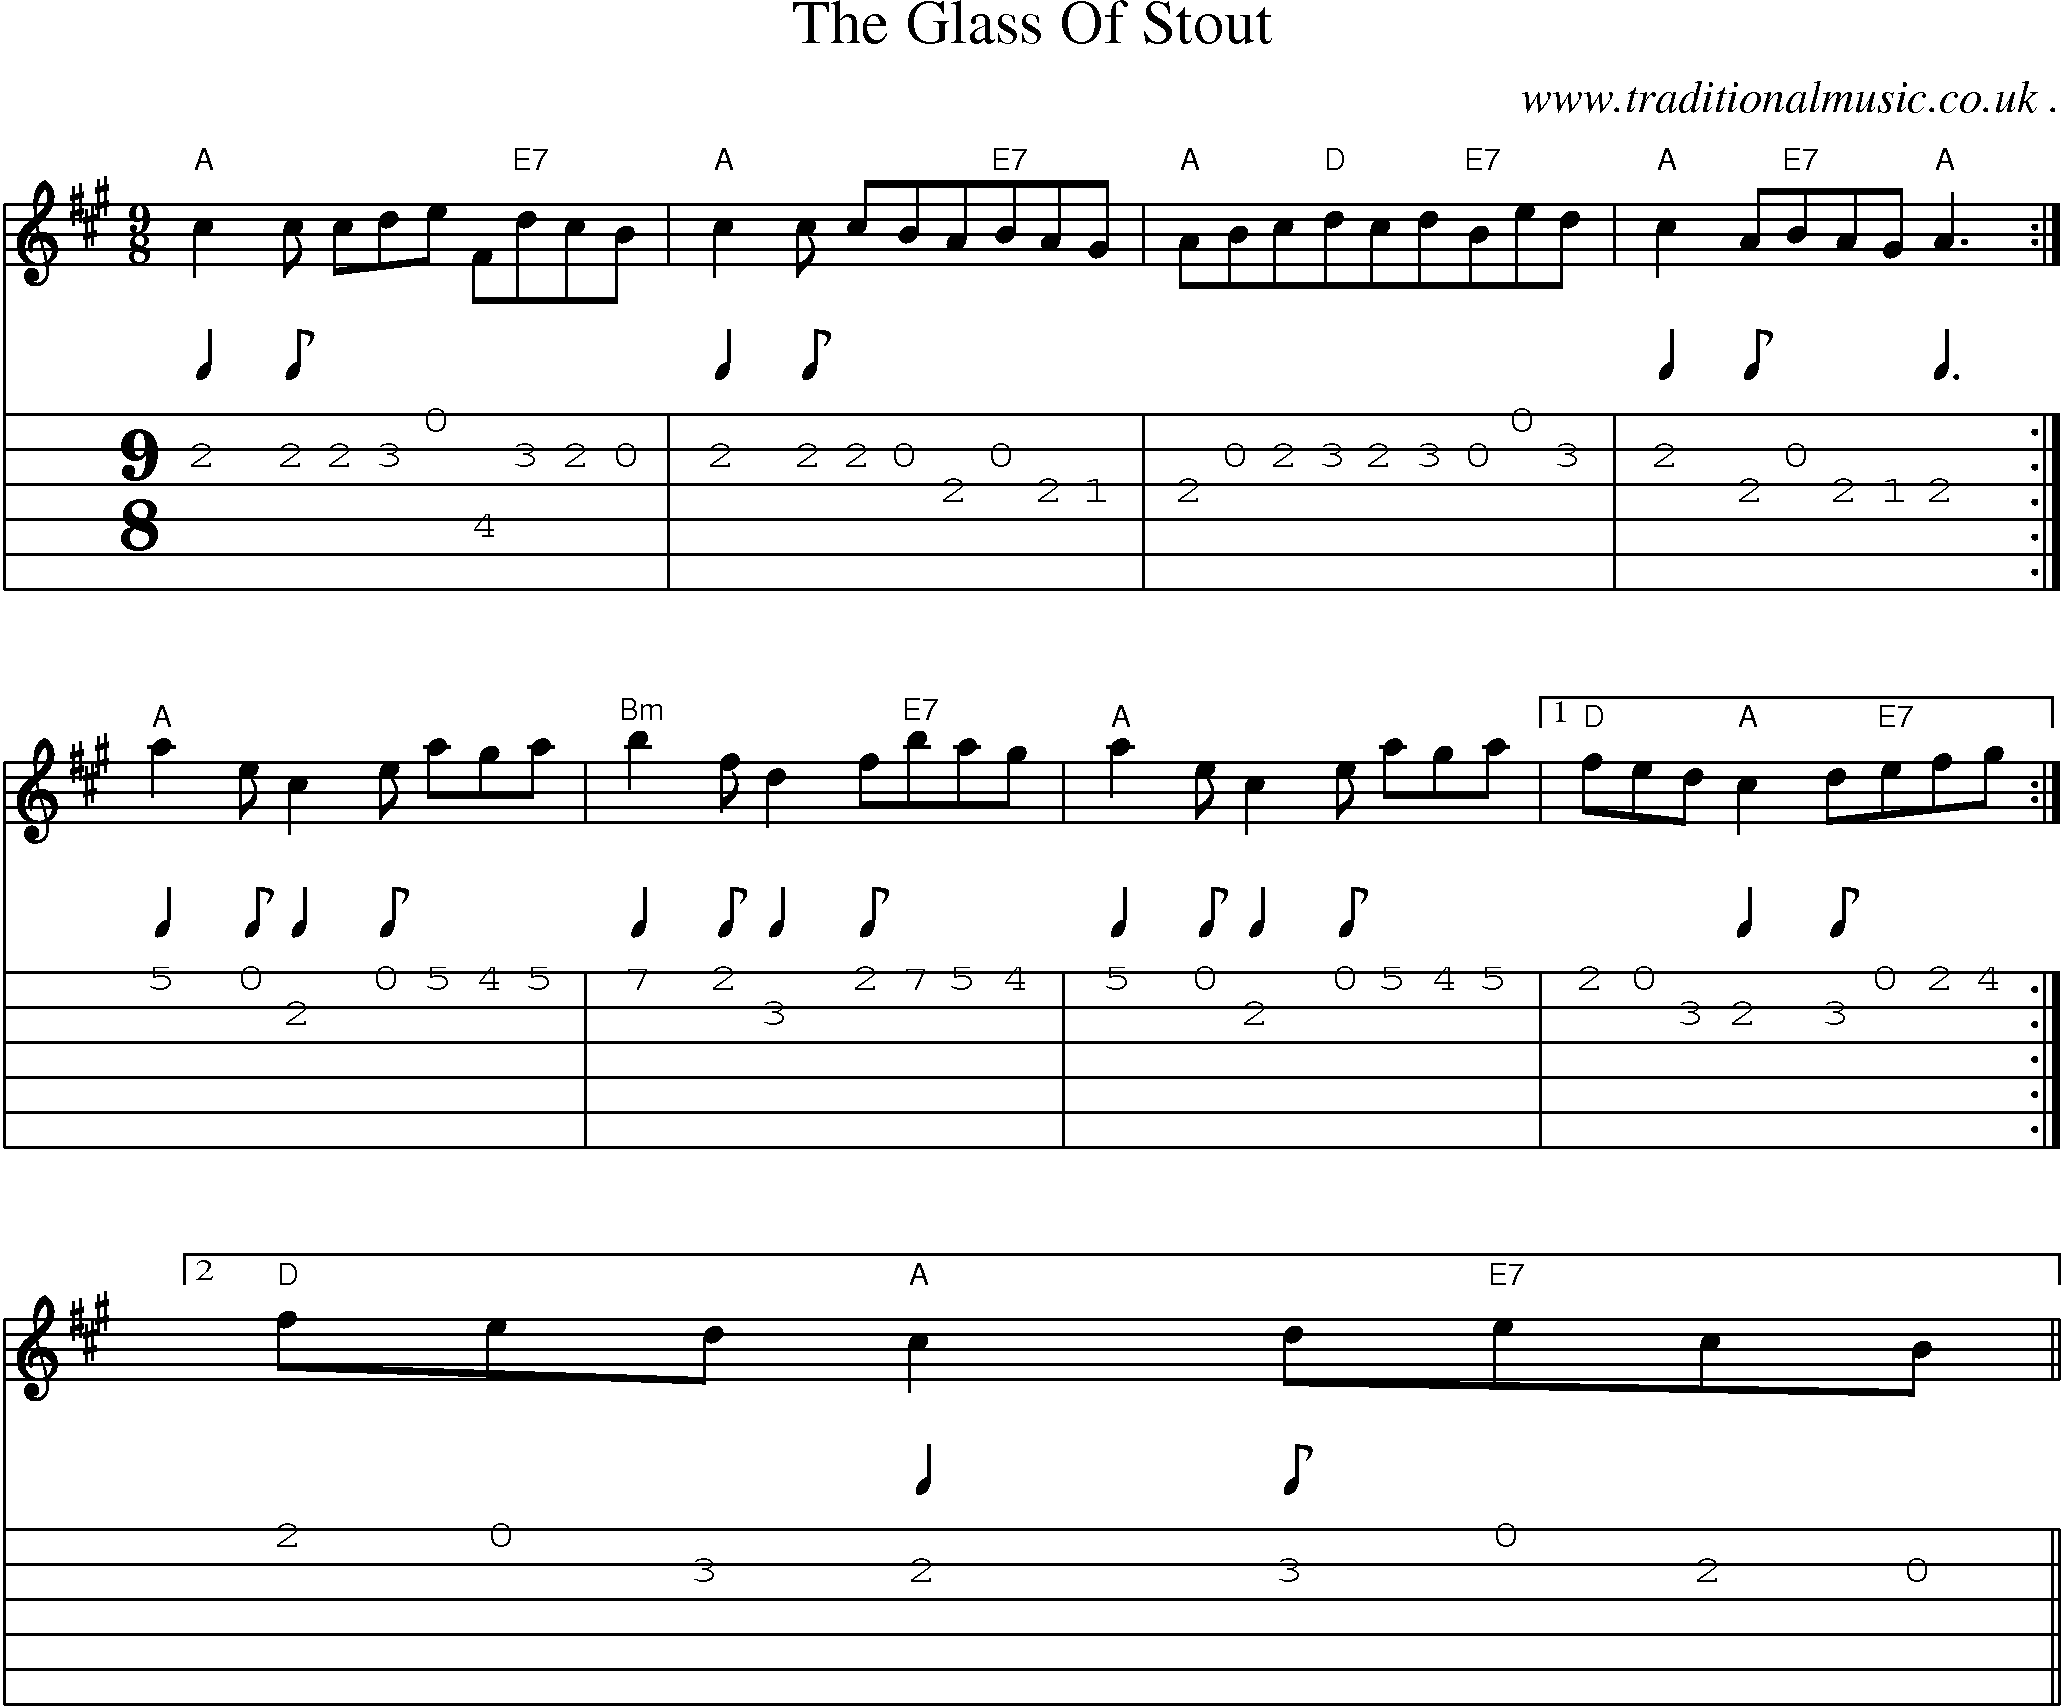 Sheet-Music and Guitar Tabs for The Glass Of Stout